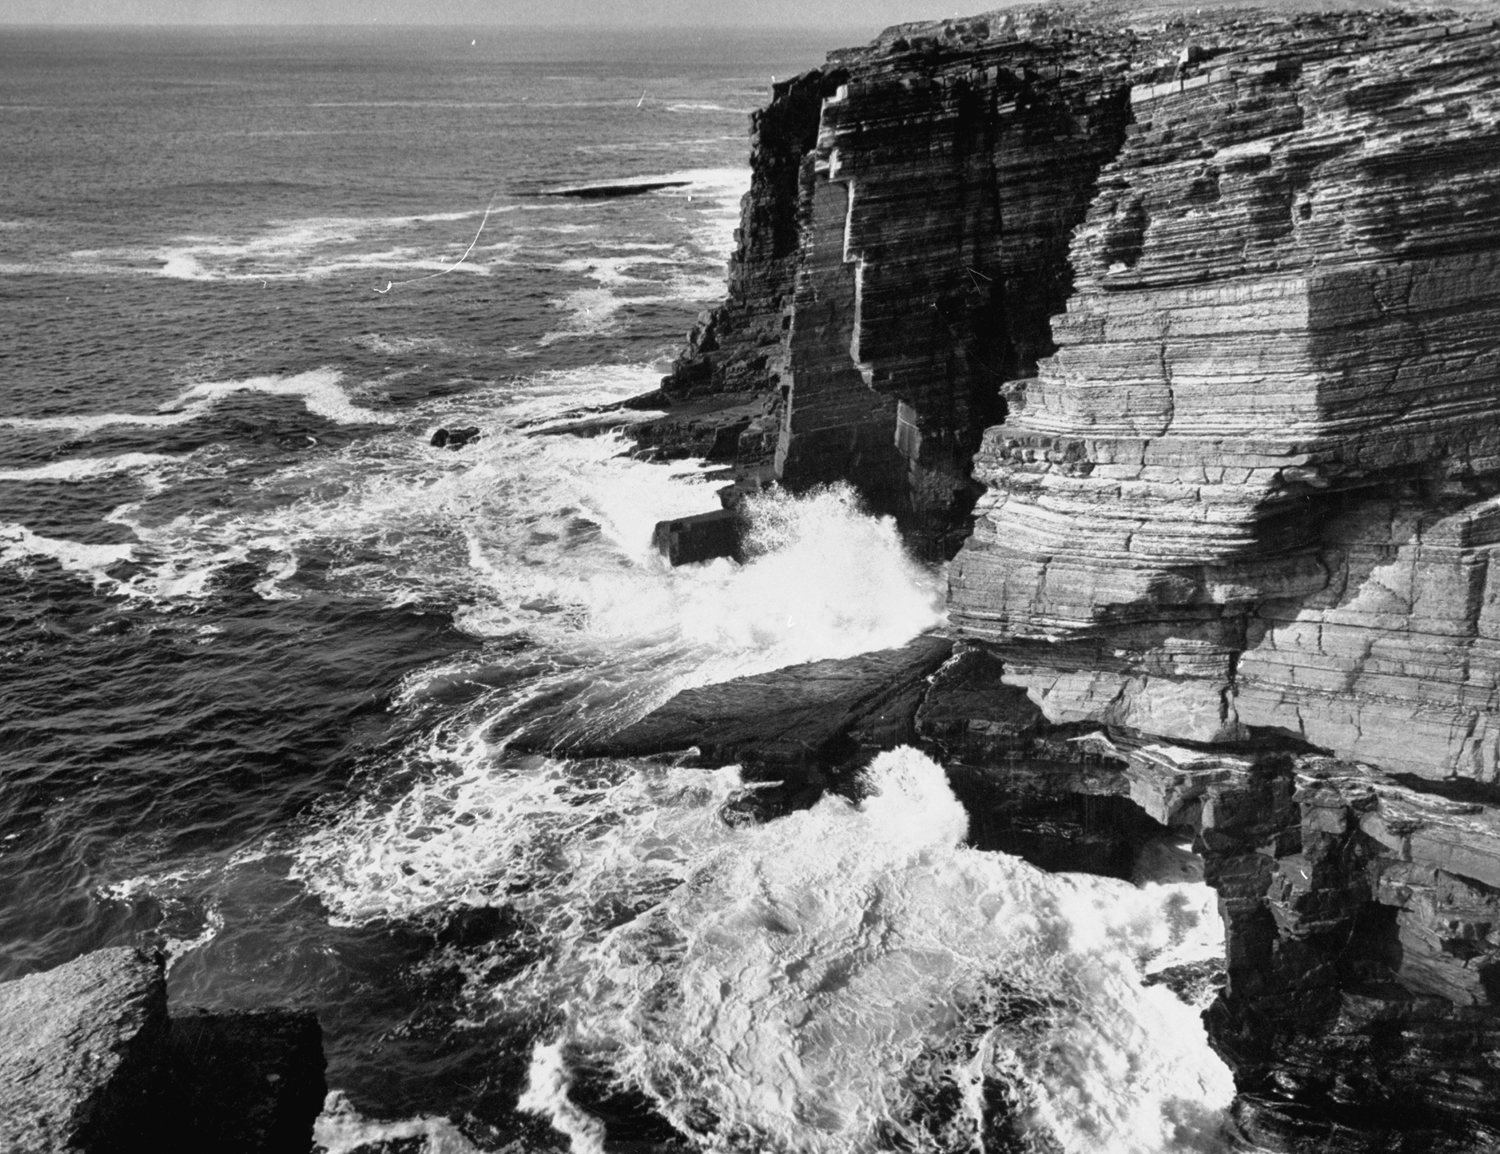 High rock cliffs in the Orkney Islands, 1952.